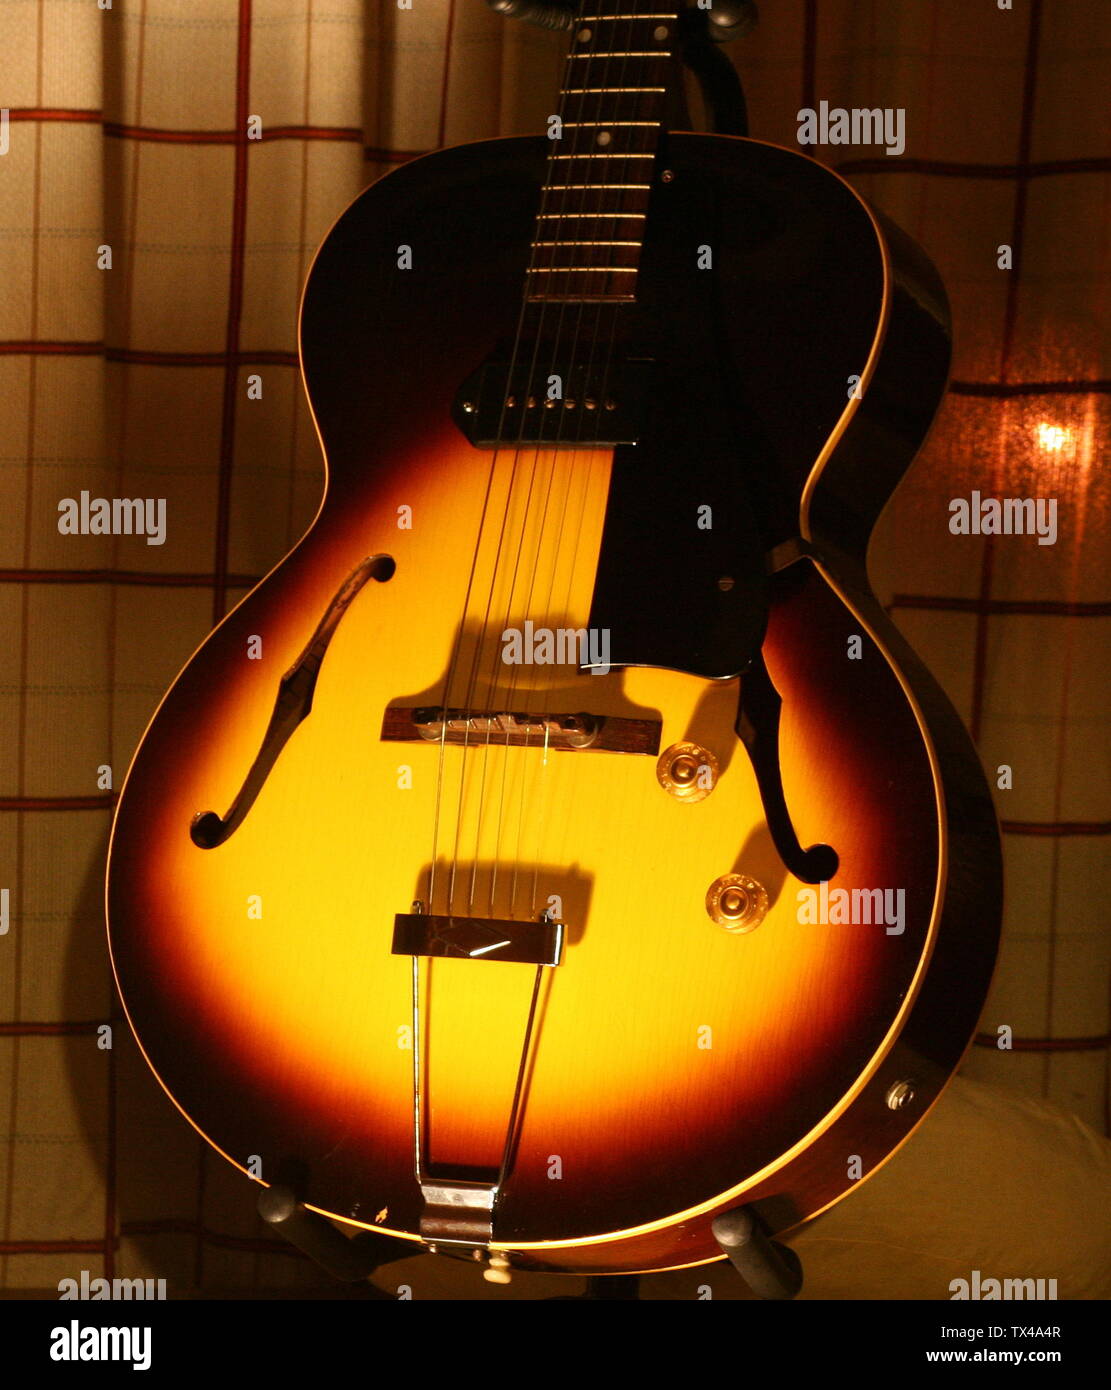 GIBSON ES-125 1955 Available: 1941 to 1970 (a student model at best). ES-125 specs: 16 1/4 wide, approximately 3.5 thick body,  P-90 pickup with dog ears with adjustable poles. pickup in neck position,  tortoise grain pickguard,  plain tailpiece, single bound top and back,  dot fingerboard inlays,  silkscreen logo,  sunburst finish.; 2008; Own work; matanao; Stock Photo